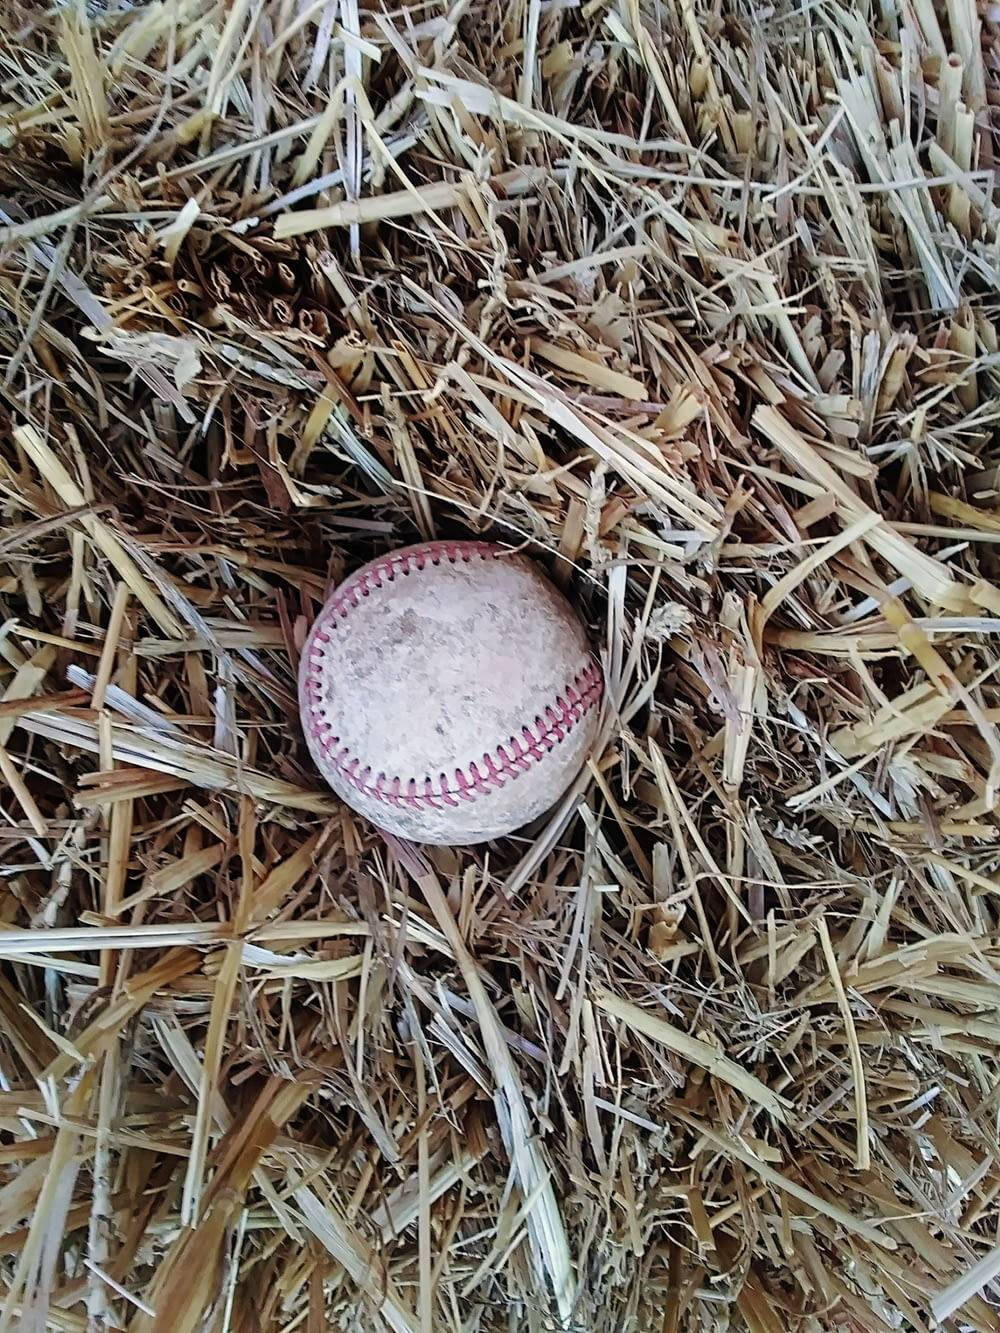 a baseball in the grass